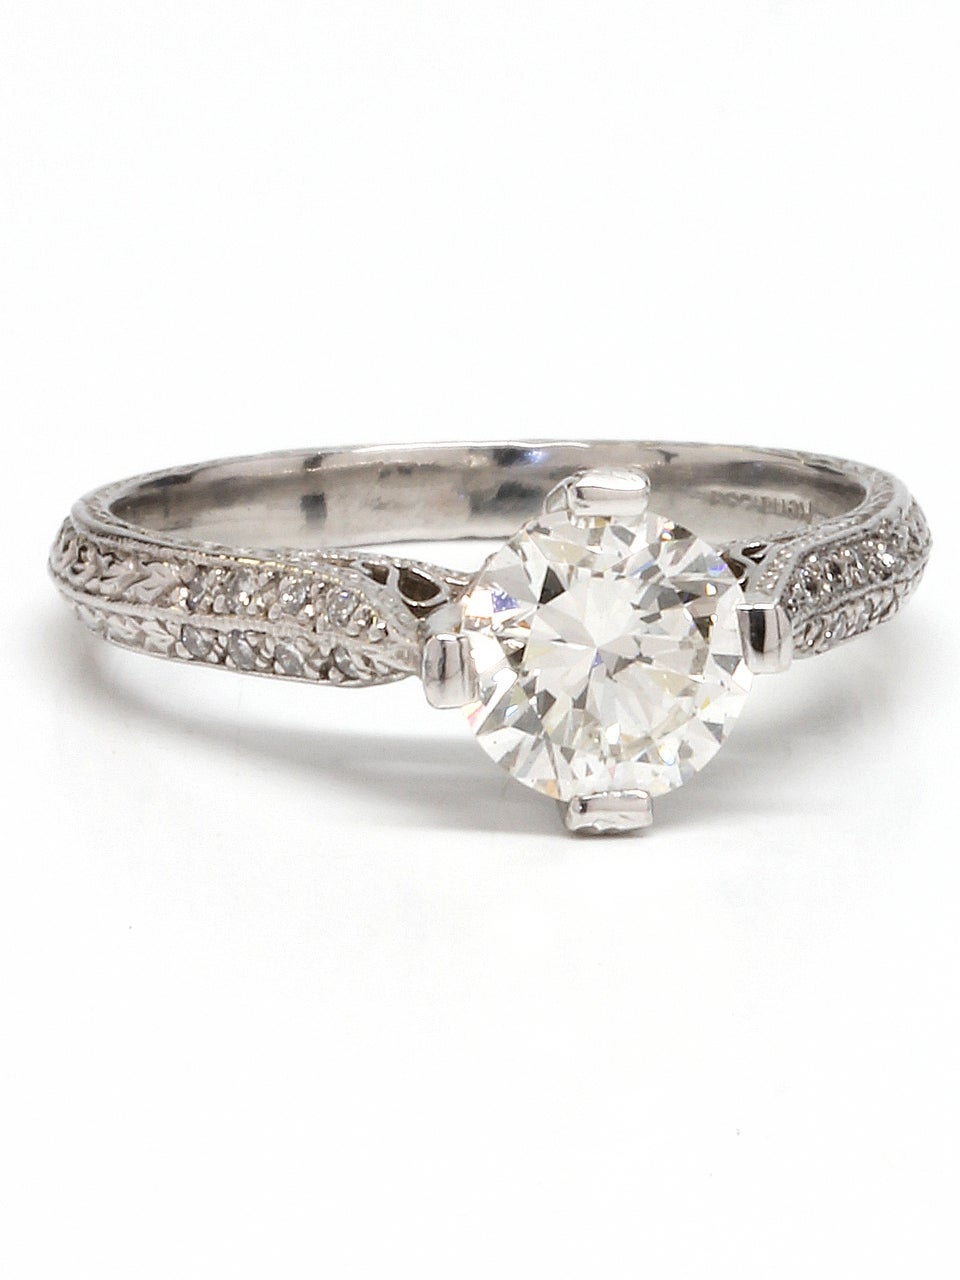 Stunning "New Vintage" 1920s inspired platinum engagement ring showcasing an EGL certified 1.05ct Transitional round cut center diamond, H-VS1. Two rows of pave diamonds adorn the shank, with diamonds even set up around the elevated center